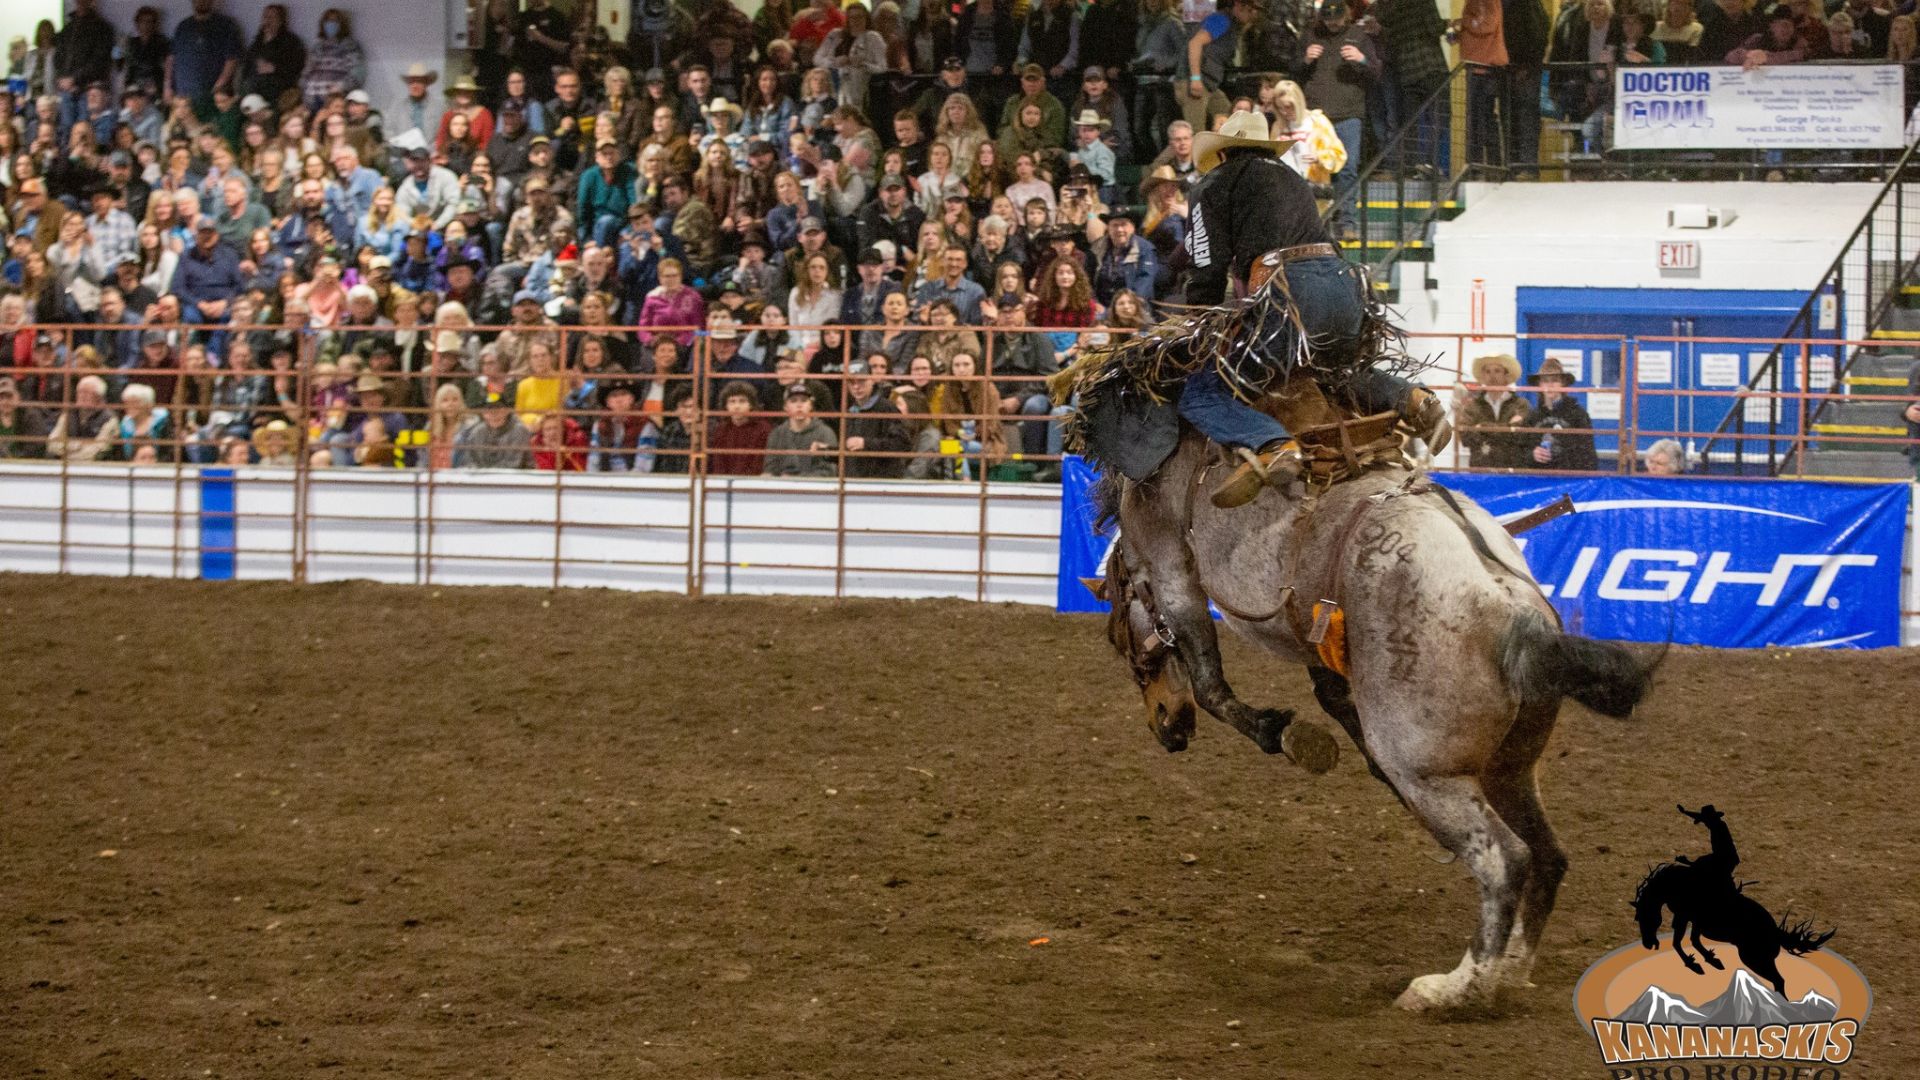 A Bronc rider's horse bucks; a packed house at the Kananaskis Pro Rodeo fill the stands behind them